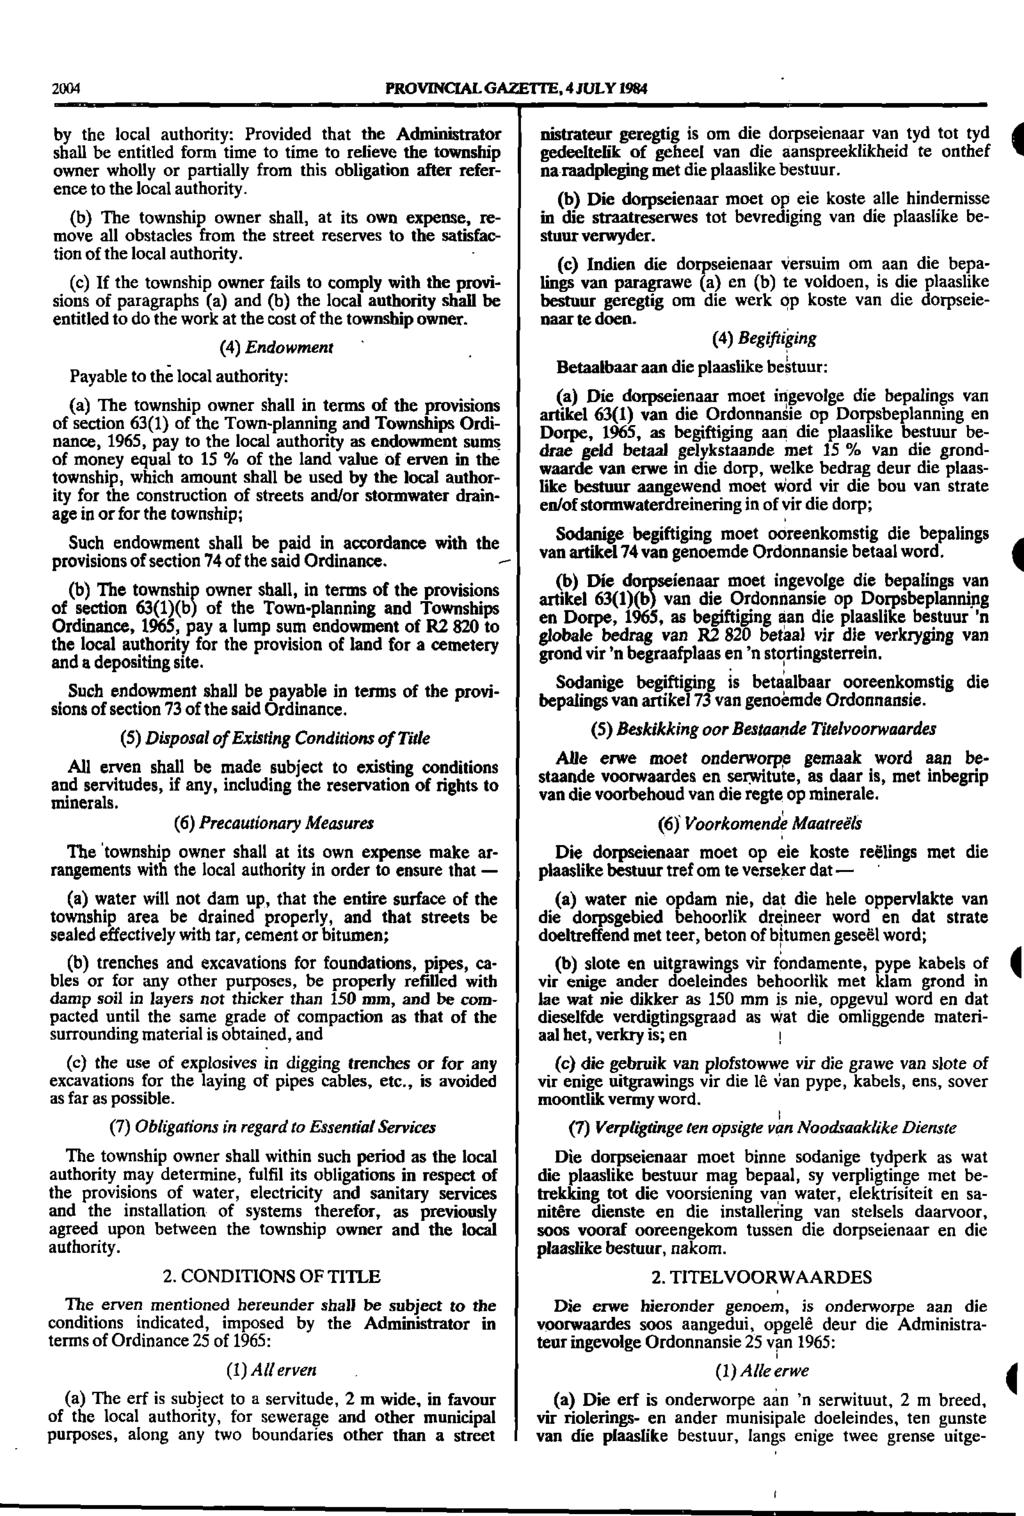 2004 PROVINCIAL GAZETTE, 4 JULY 984 by the local authority: Provided that the Administrator shall be entitled form time to time to relieve the township owner wholly or partially from this obligation